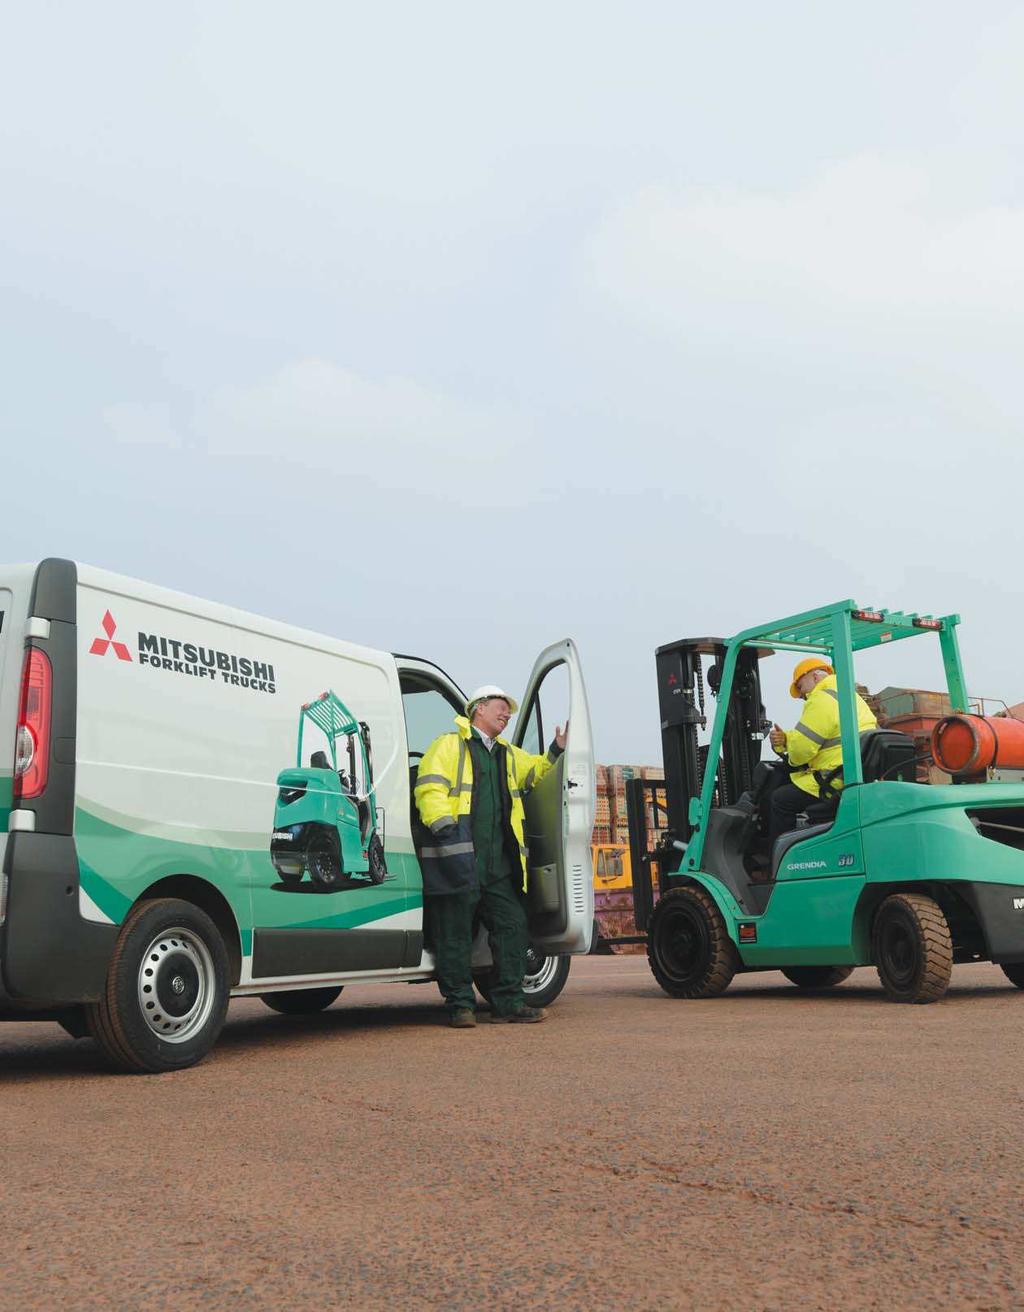 you ll never work alone Like any product bearing the Mitsubishi name, our materials handling equipment benefits from the huge resources and cutting-edge technology of one of the world s largest